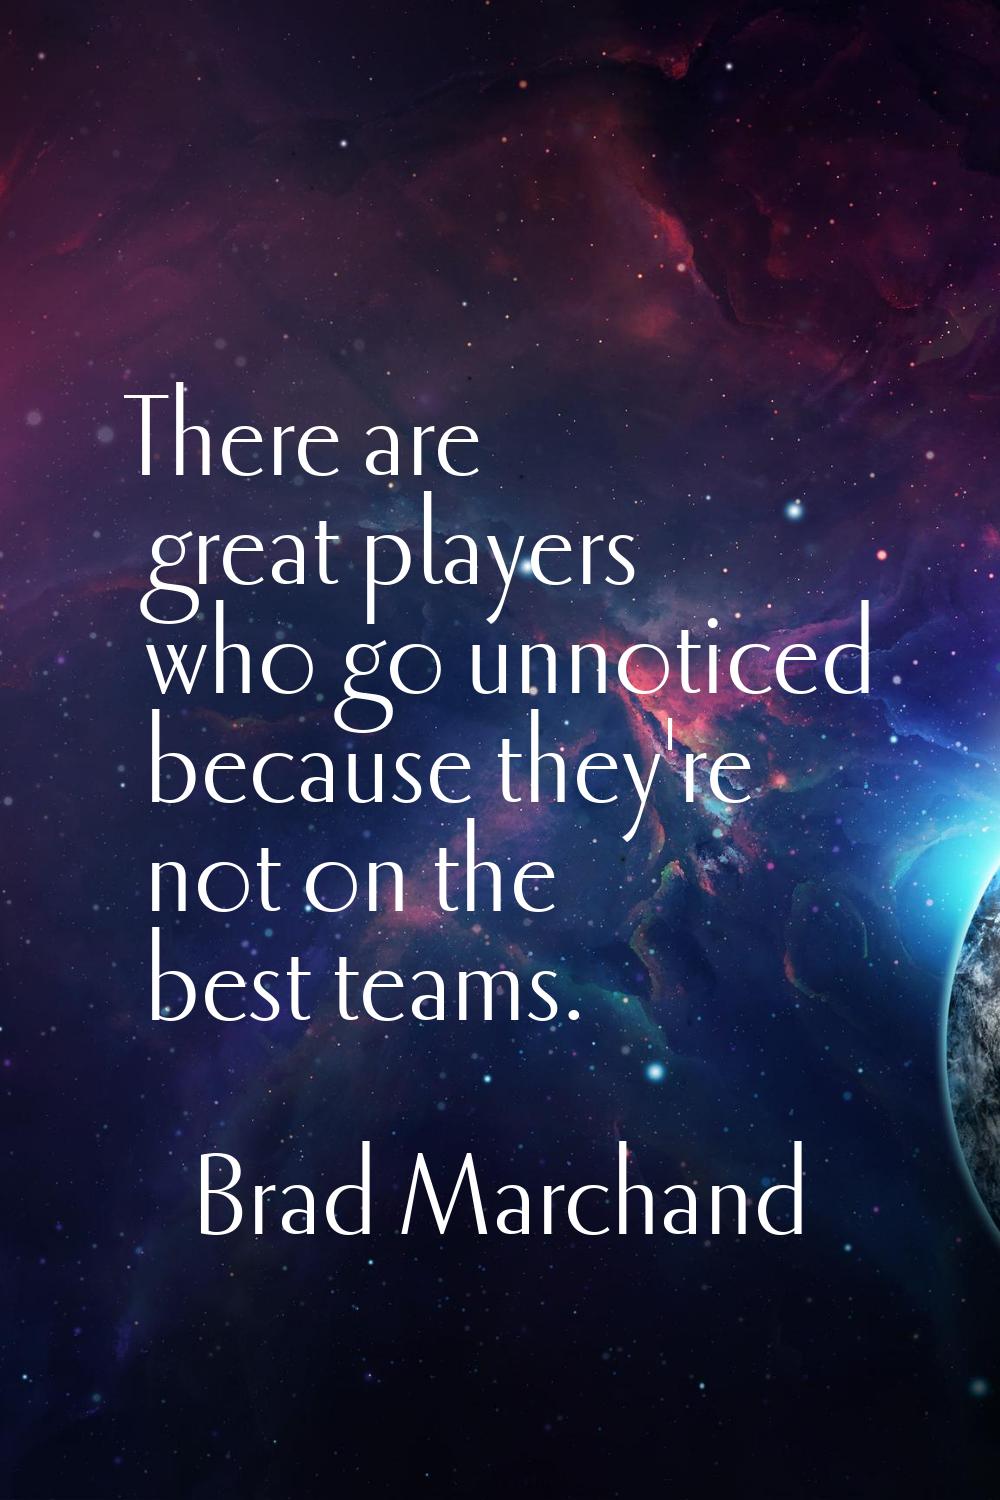 There are great players who go unnoticed because they're not on the best teams.